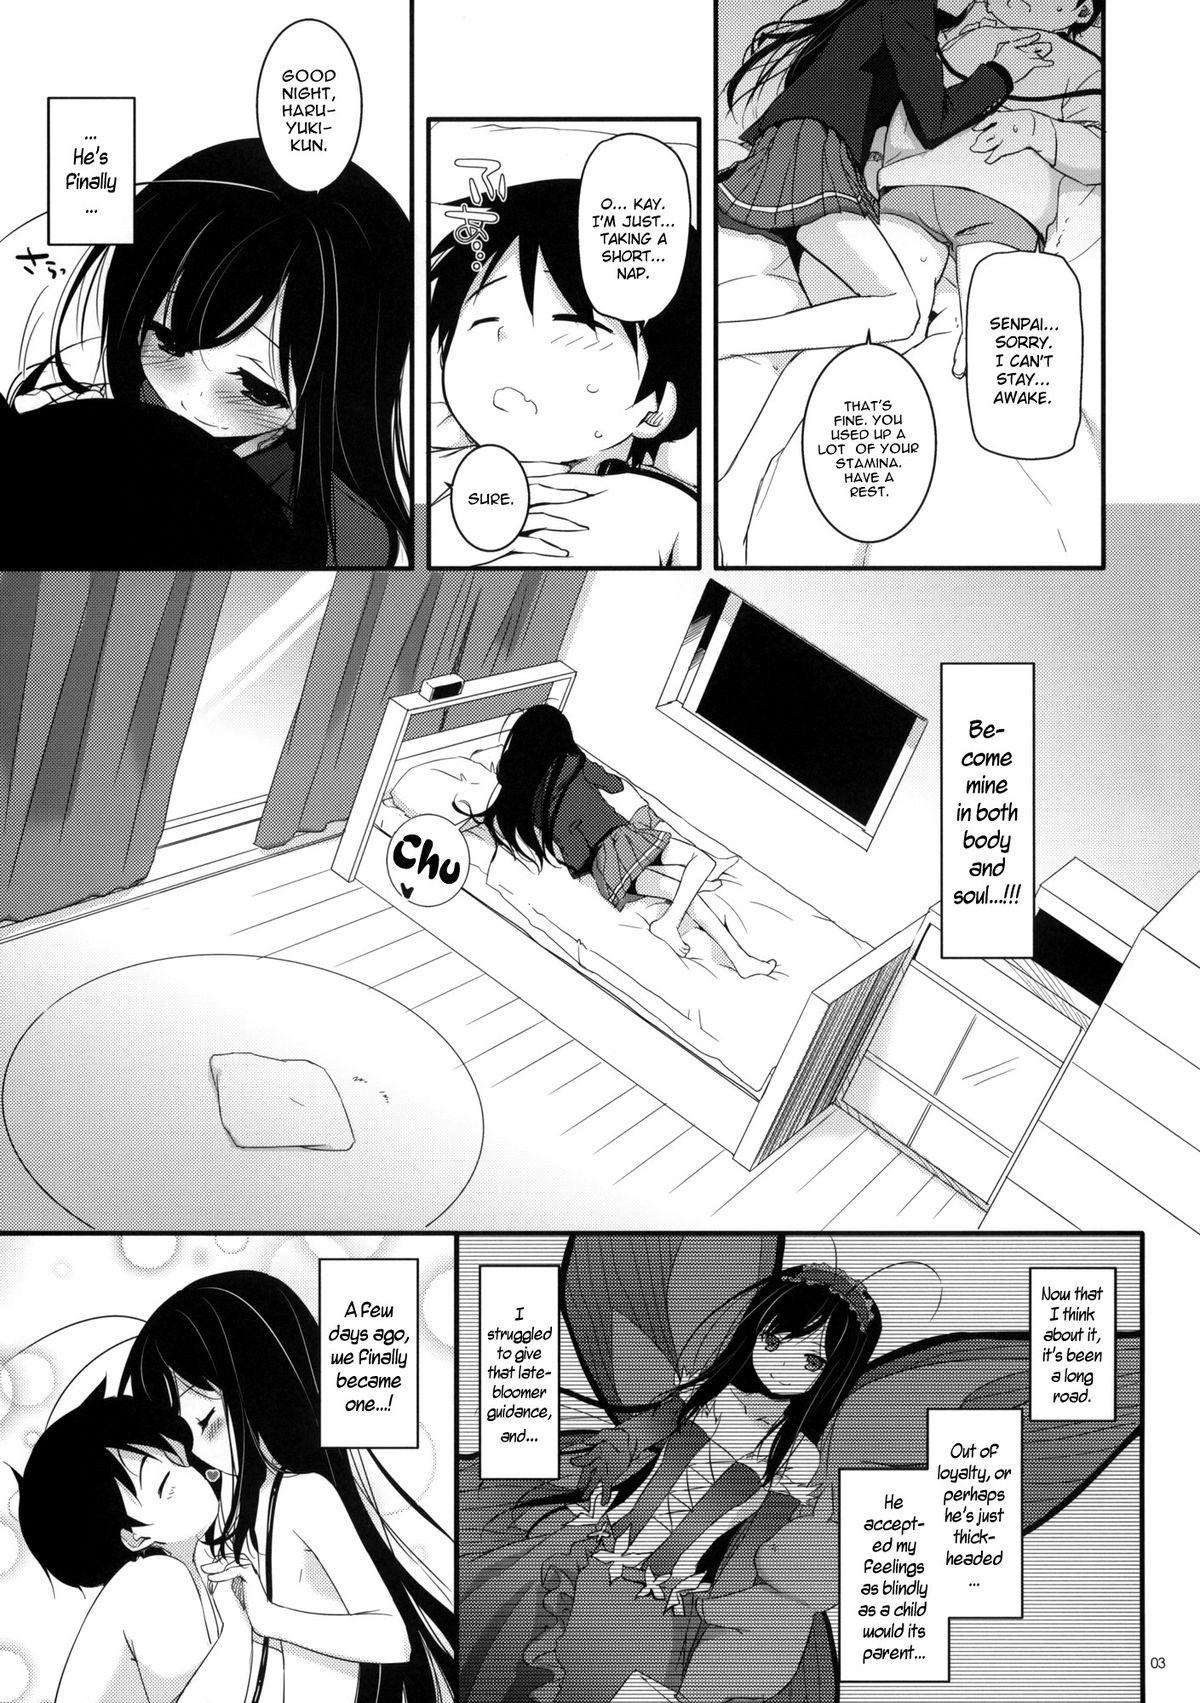 Bitch D.L. action 68 - Accel world Street - Page 2